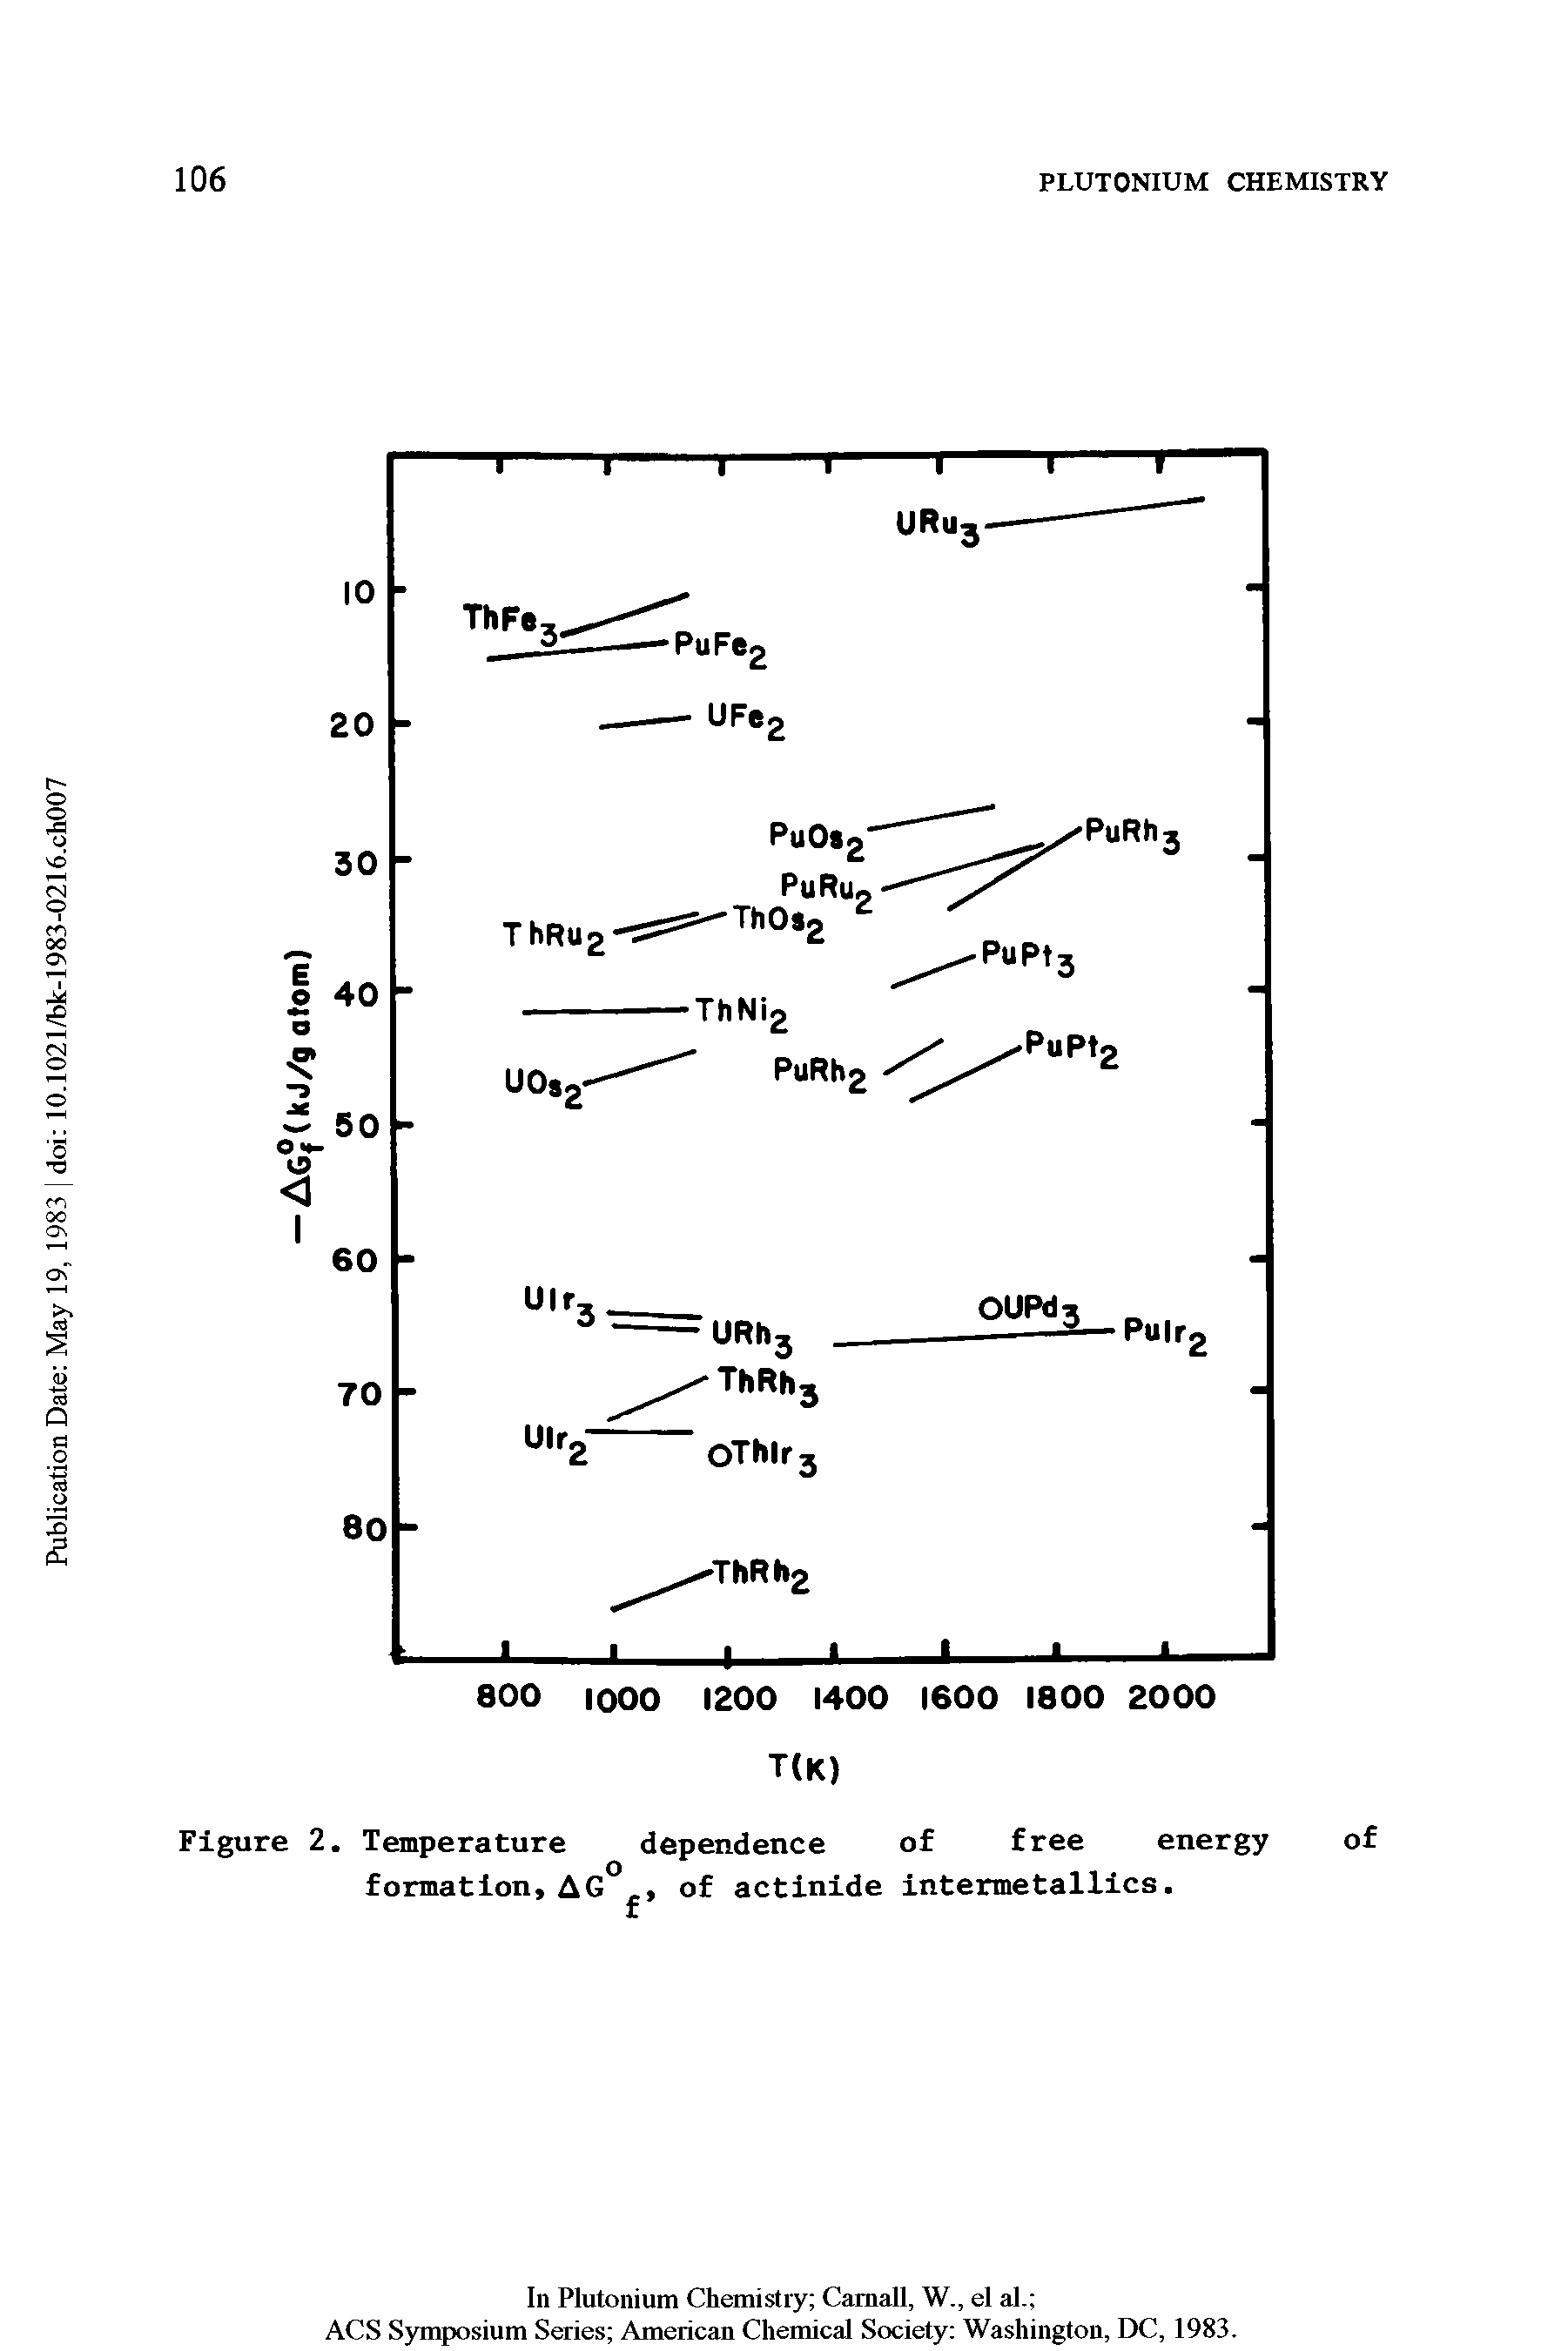 Figure 2. Temperature dependence of free energy of formation,AG of actinide intermetallics.